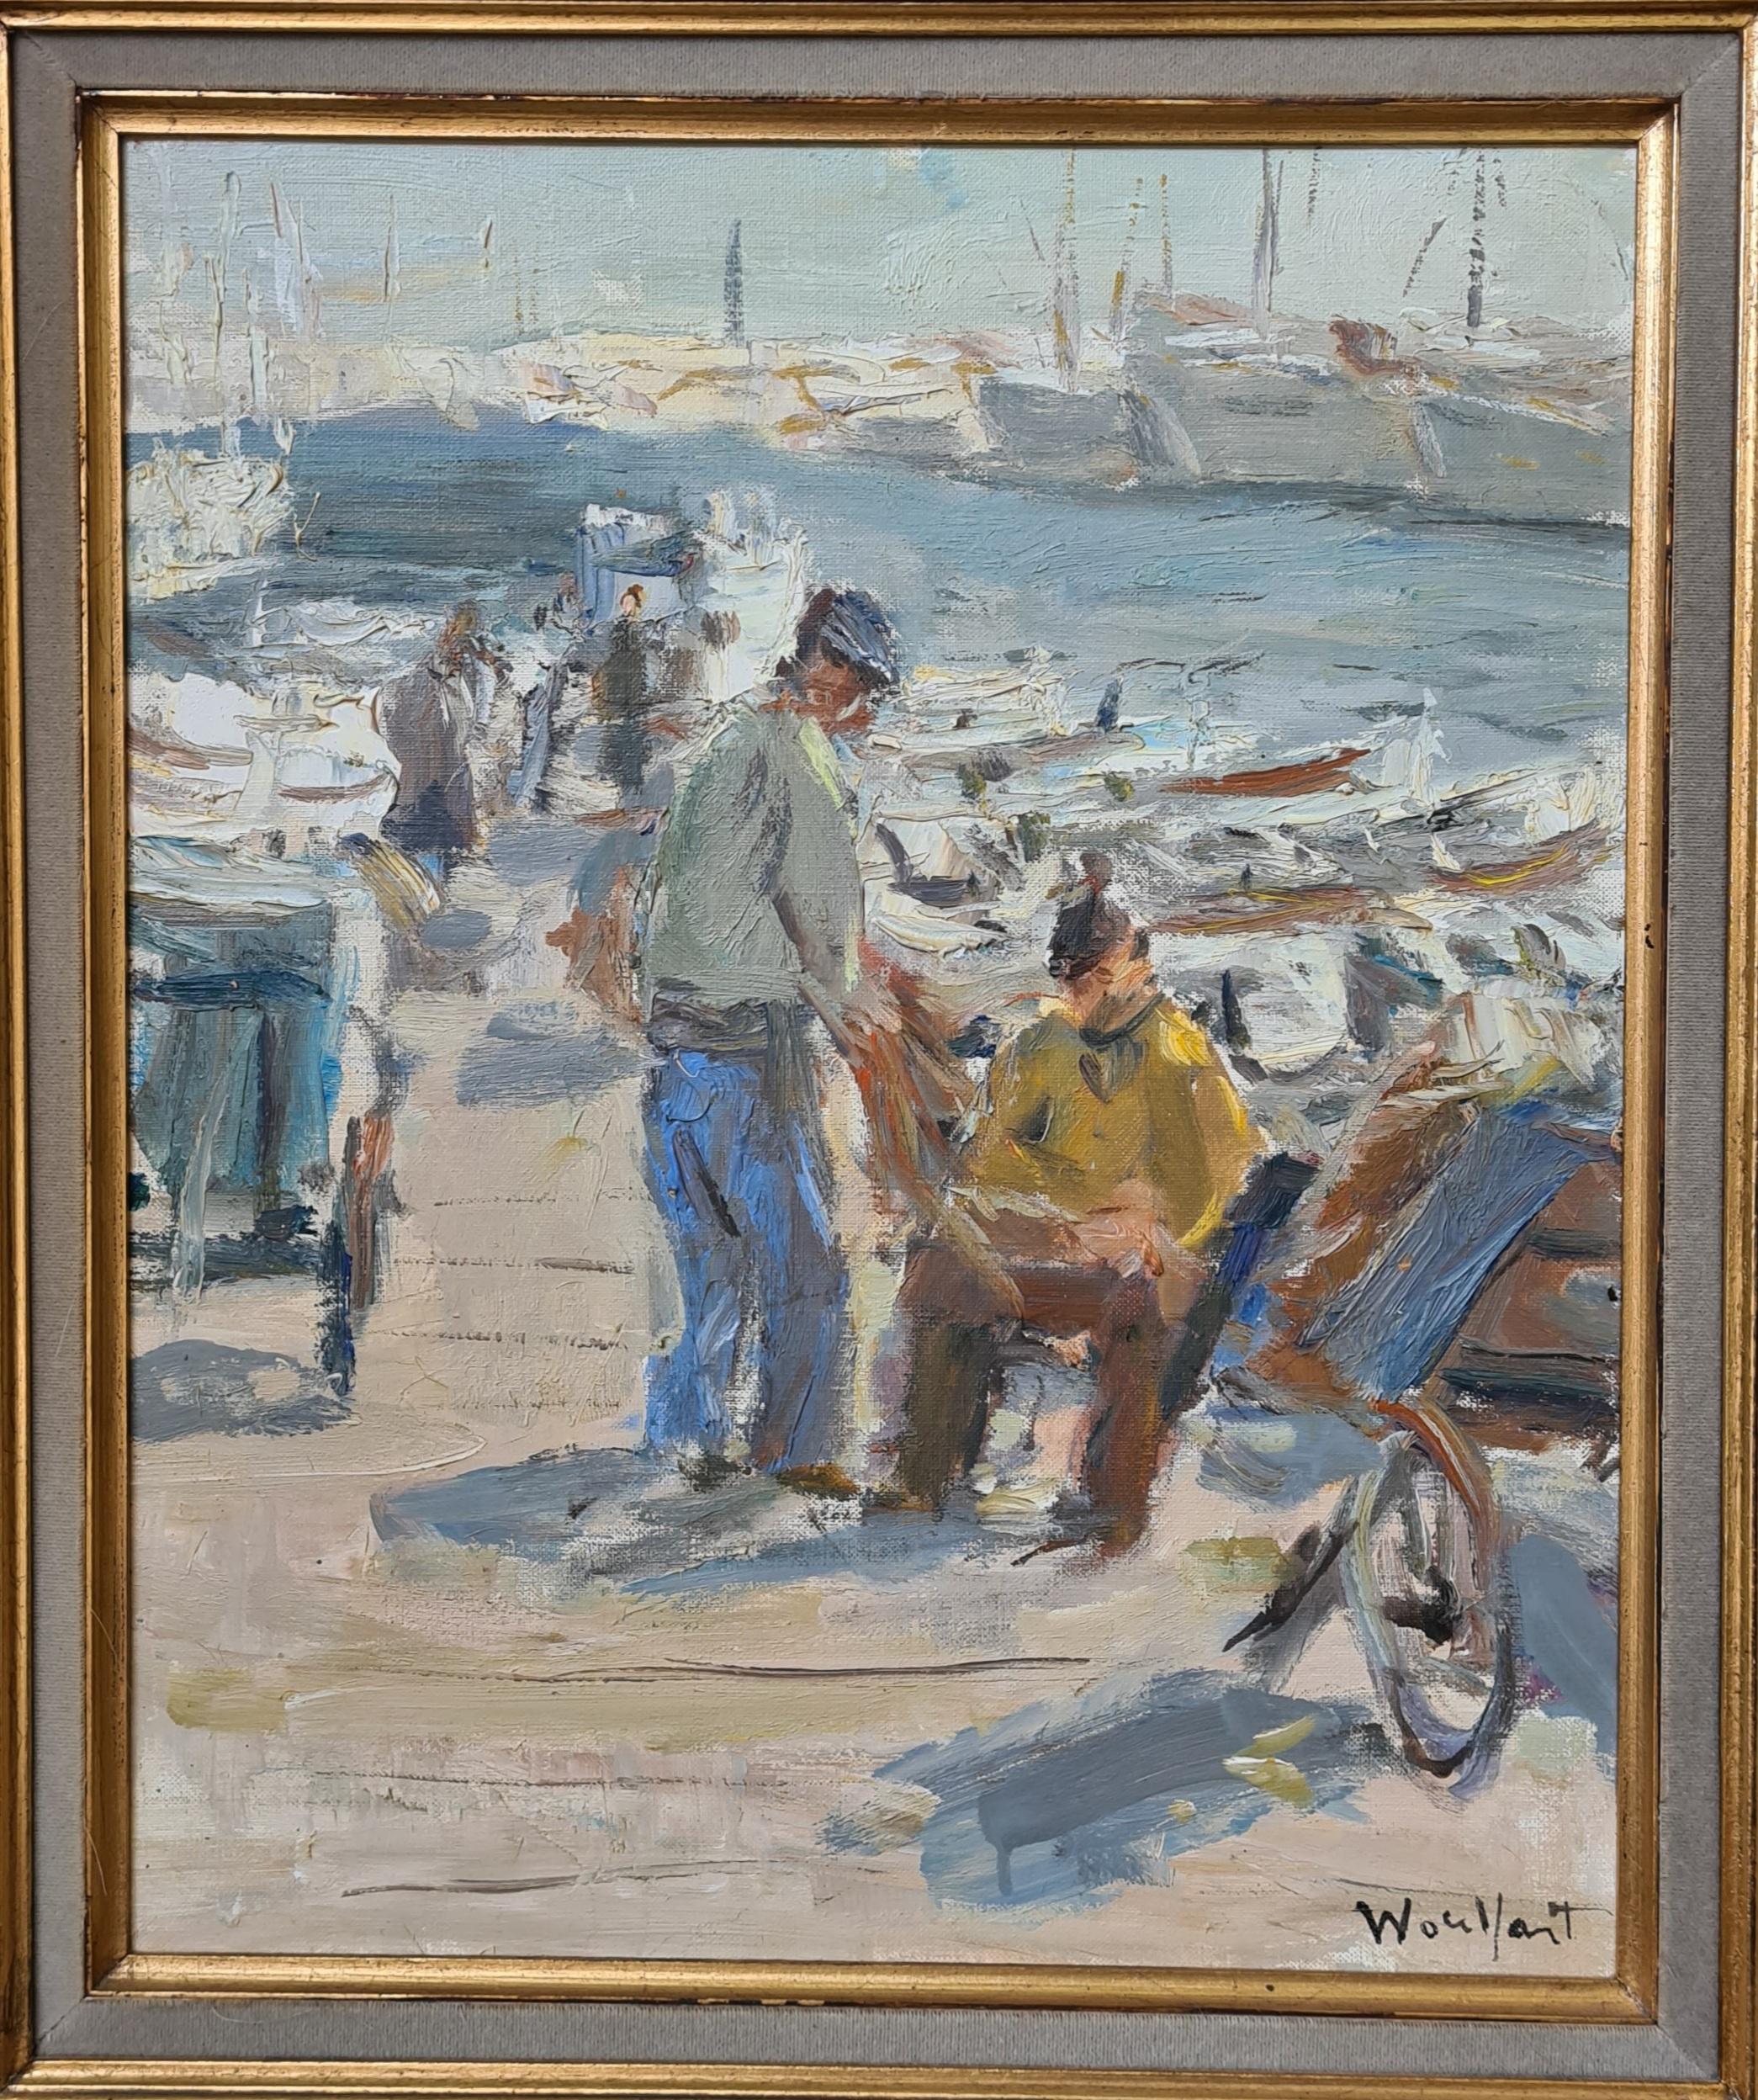 Marius Woulfart Landscape Painting - Fishermen in the Port of Cannes, mid 20th Century Oil on Canvas.